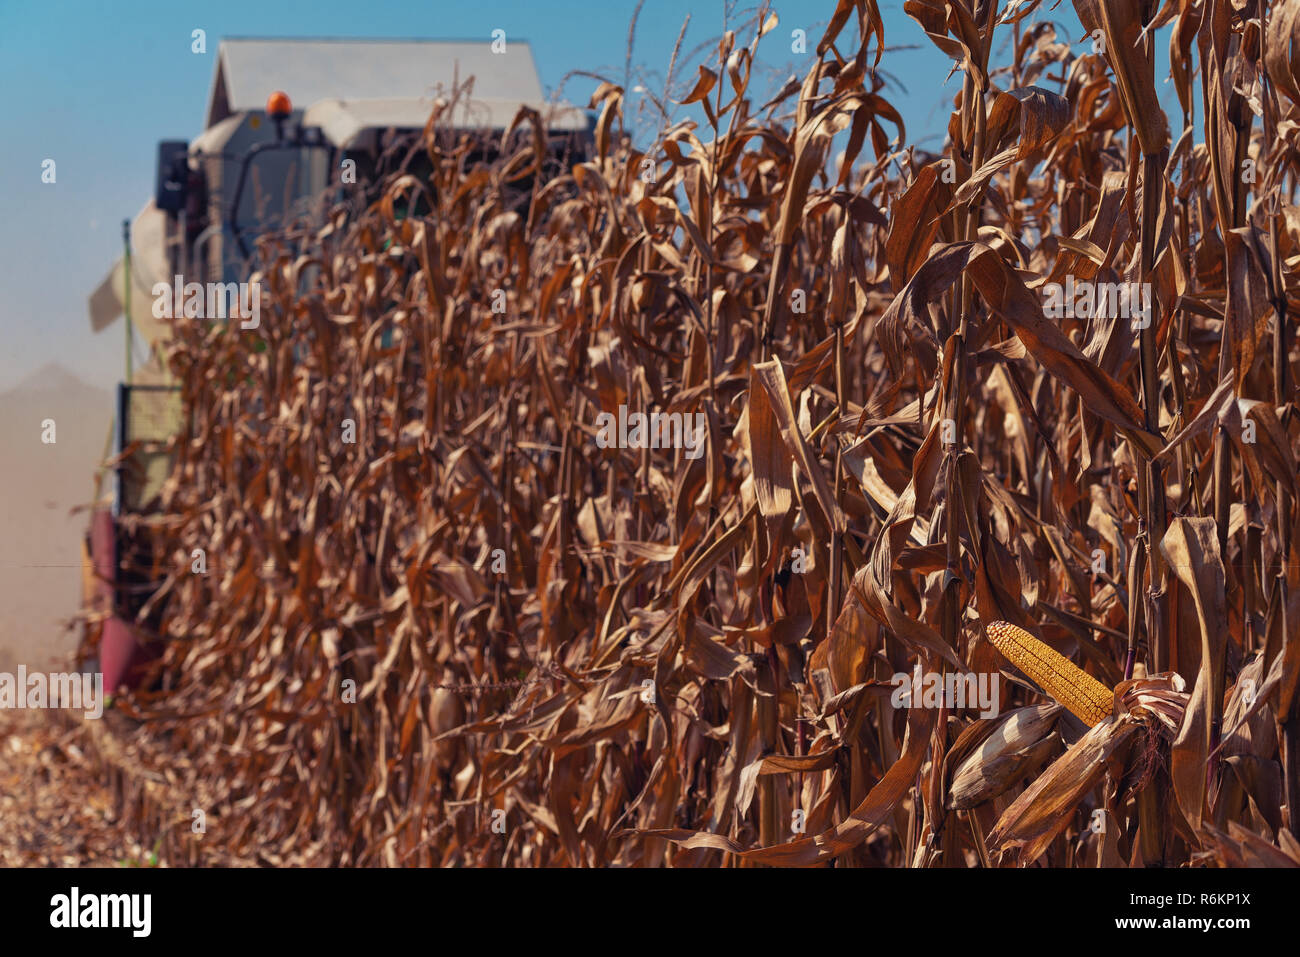 Ripe corn crops harvest in late summer Stock Photo